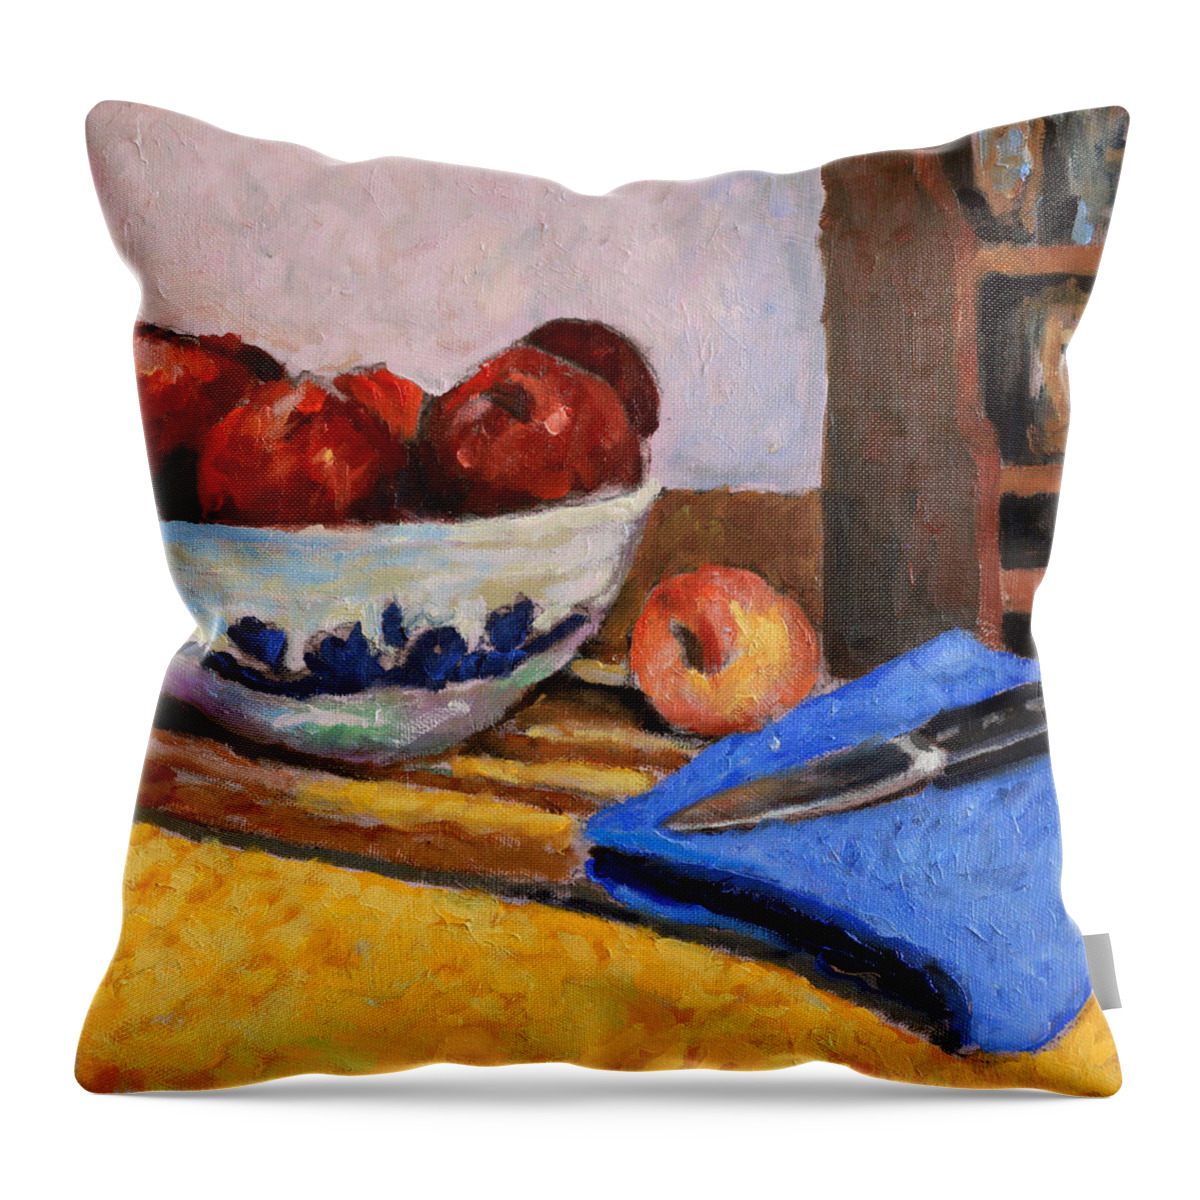 Apples Throw Pillow featuring the painting The Makings of a Pie by David Zimmerman